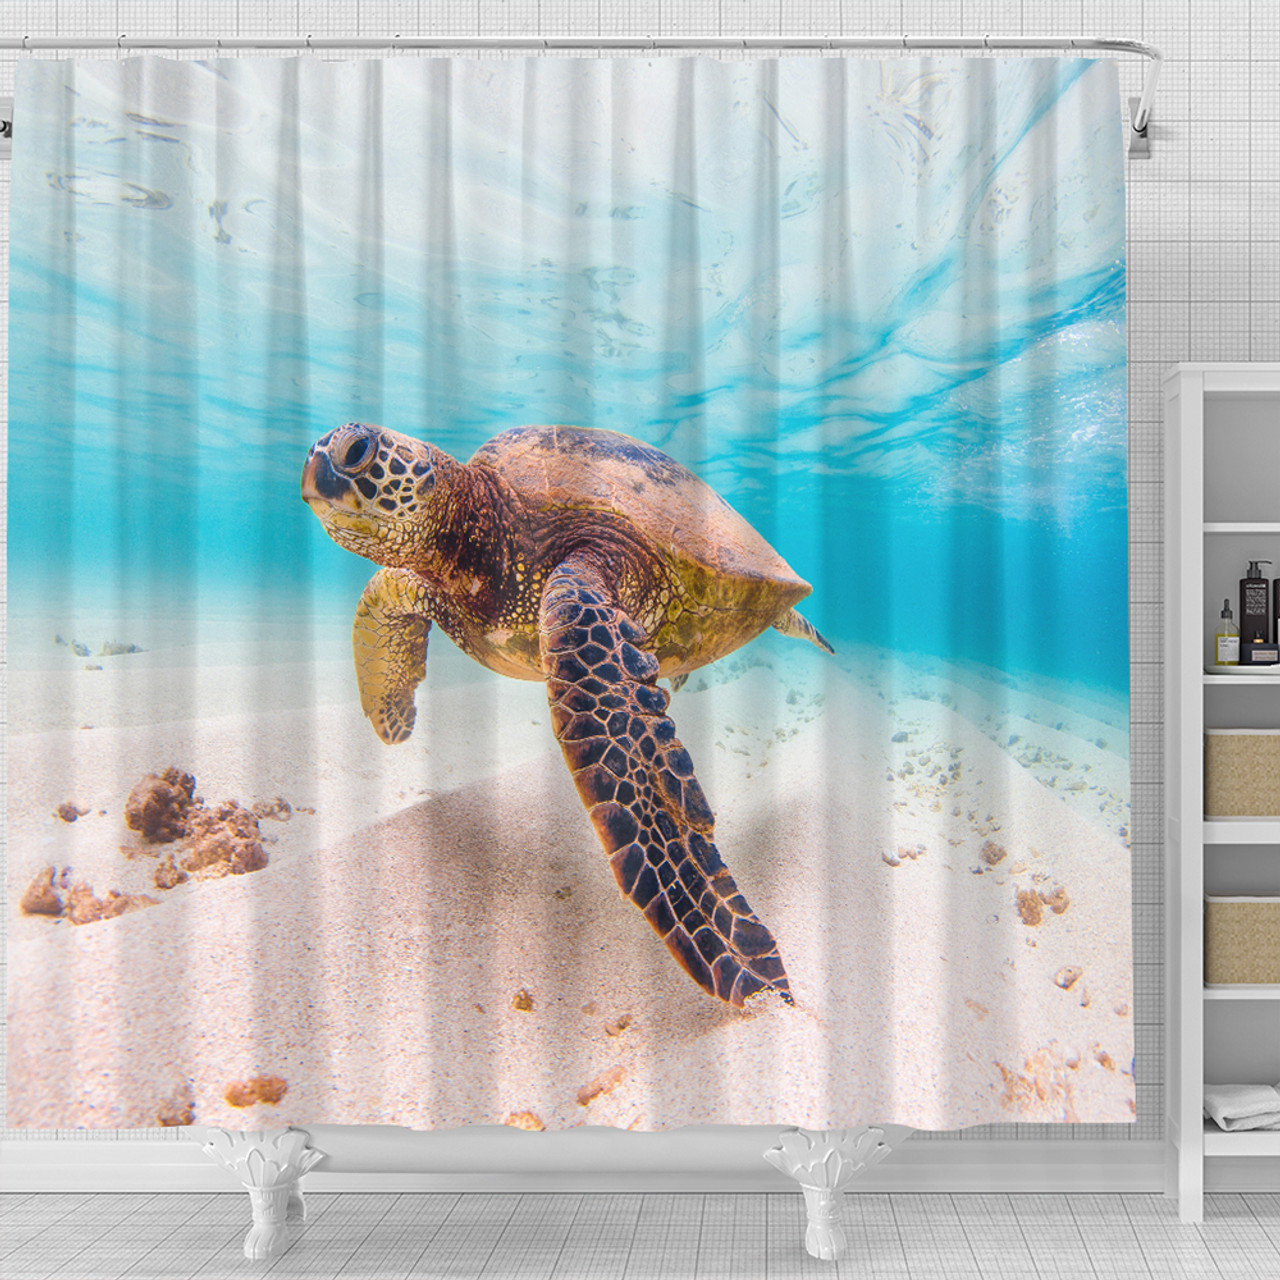 Hawaii Shower Curtain Ocean Picture